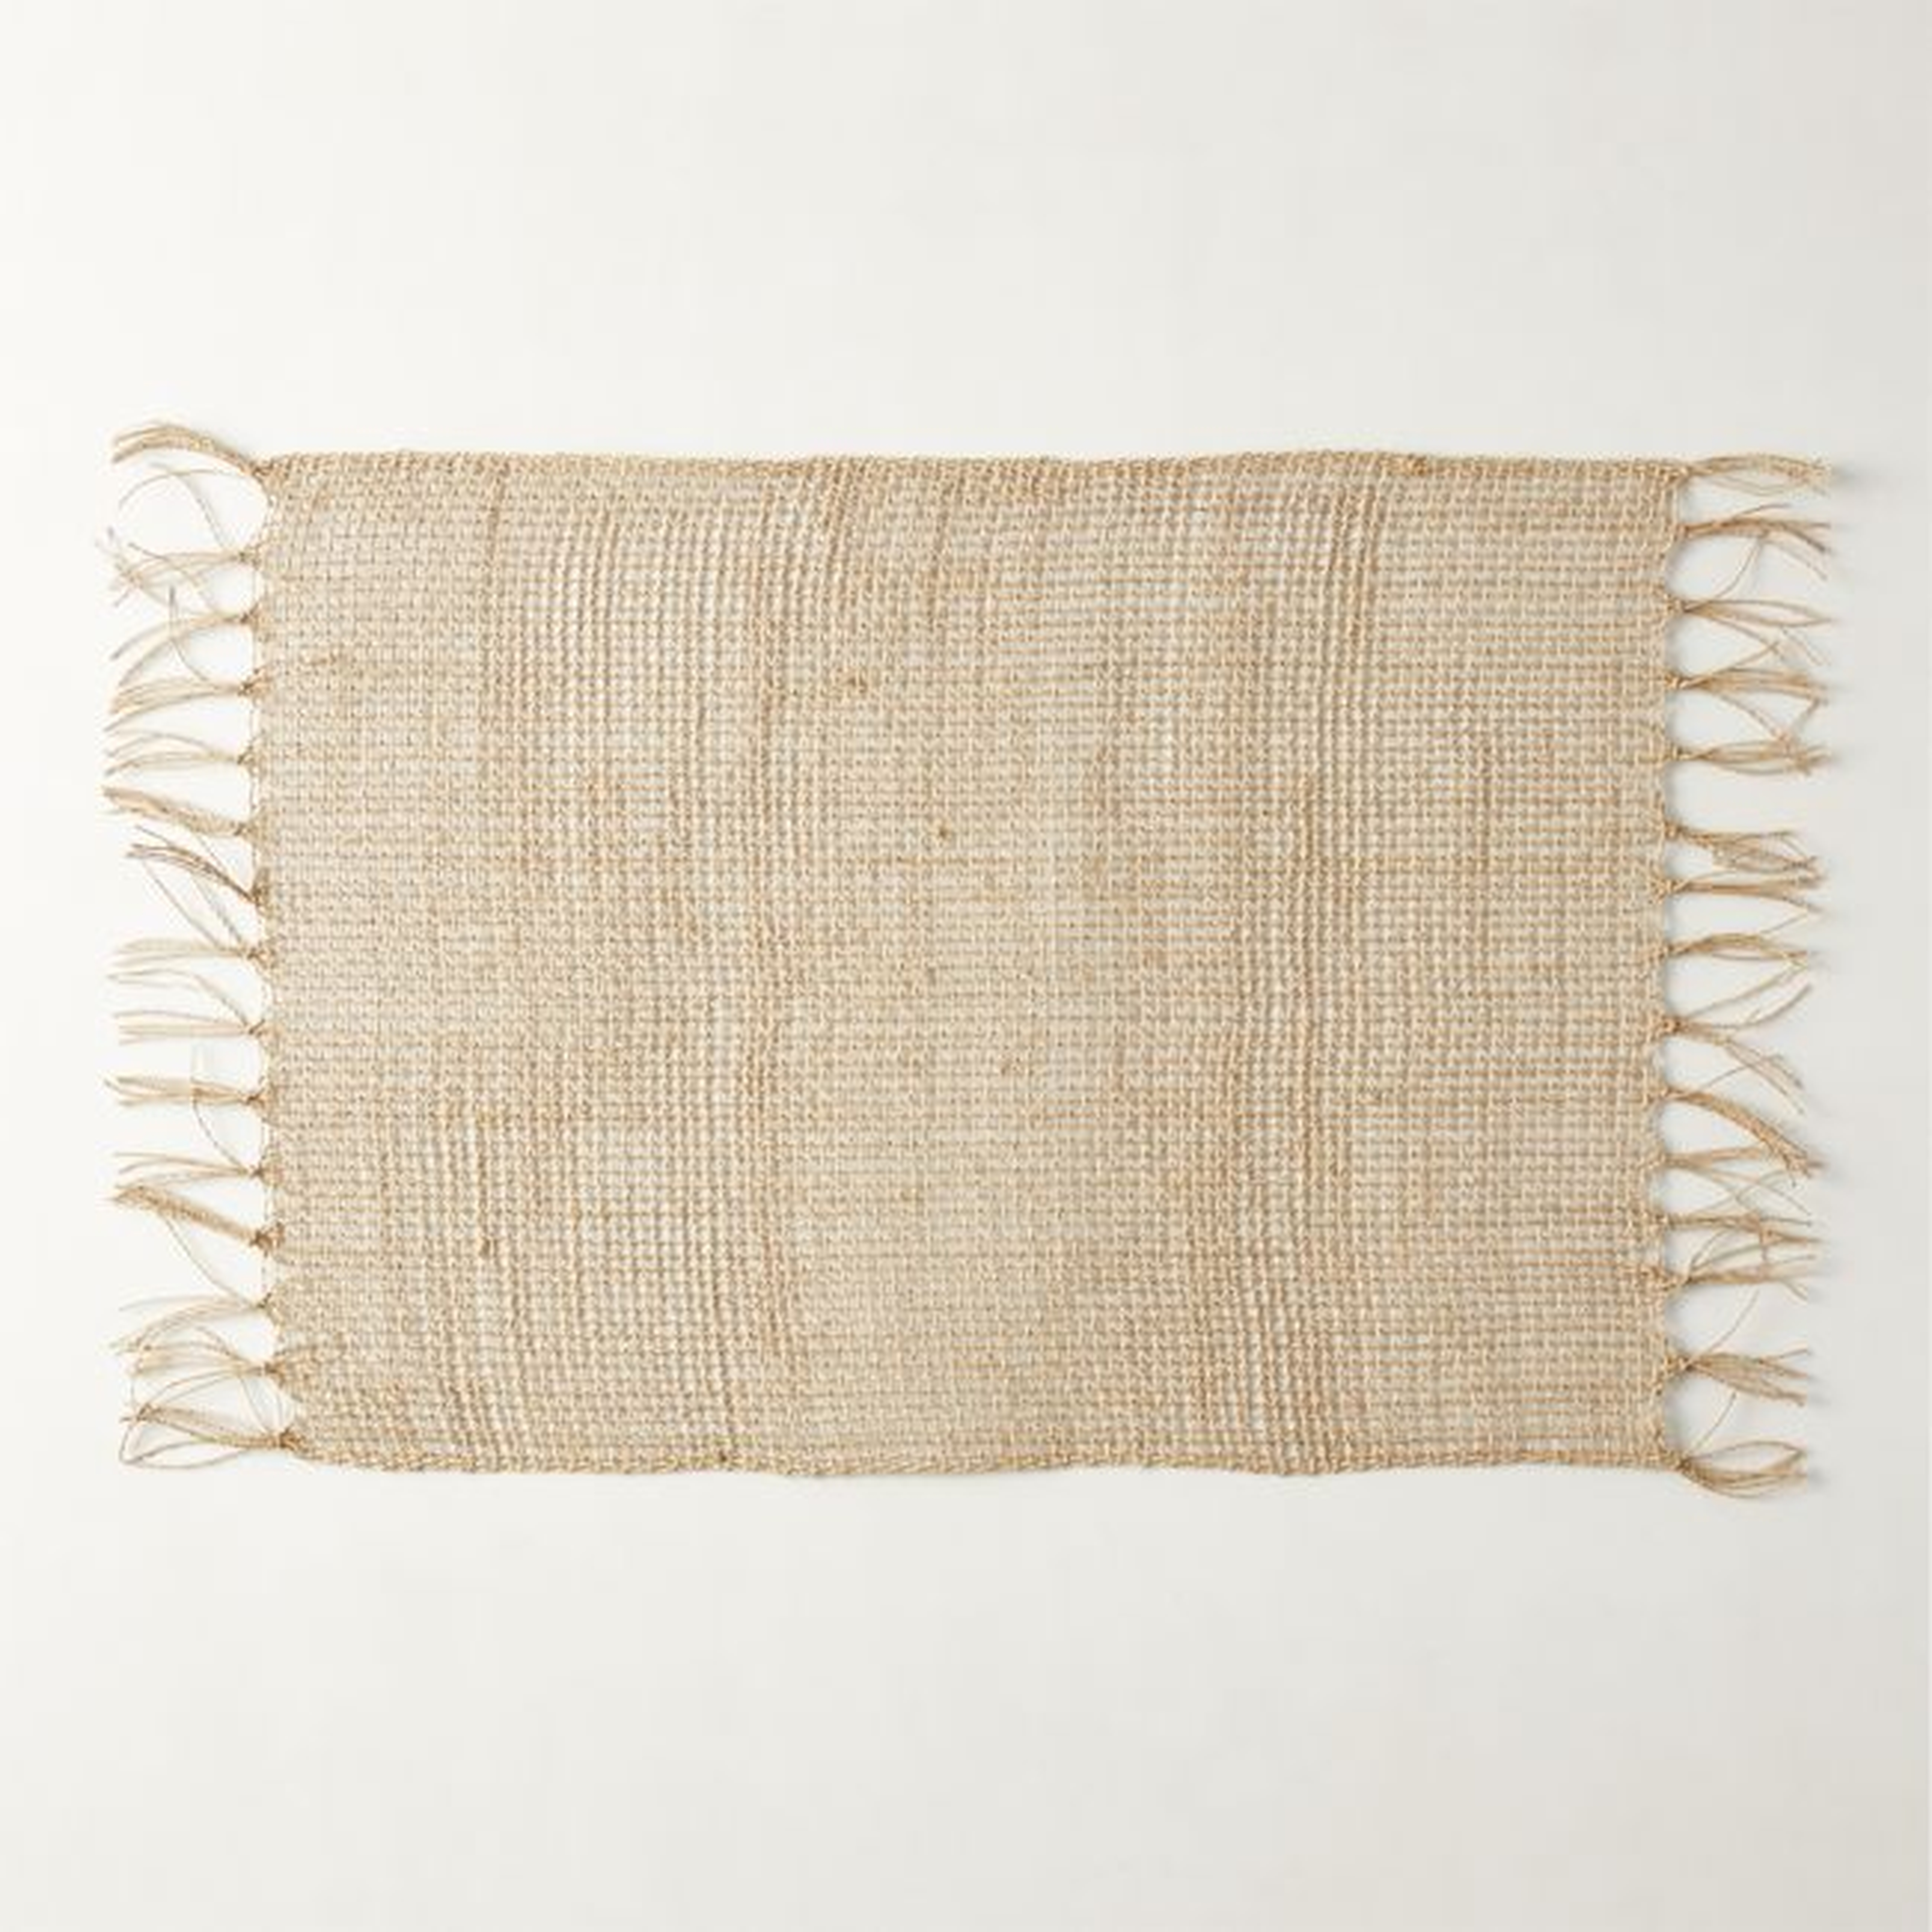 Open Weave Natural Woven Placemat - CB2